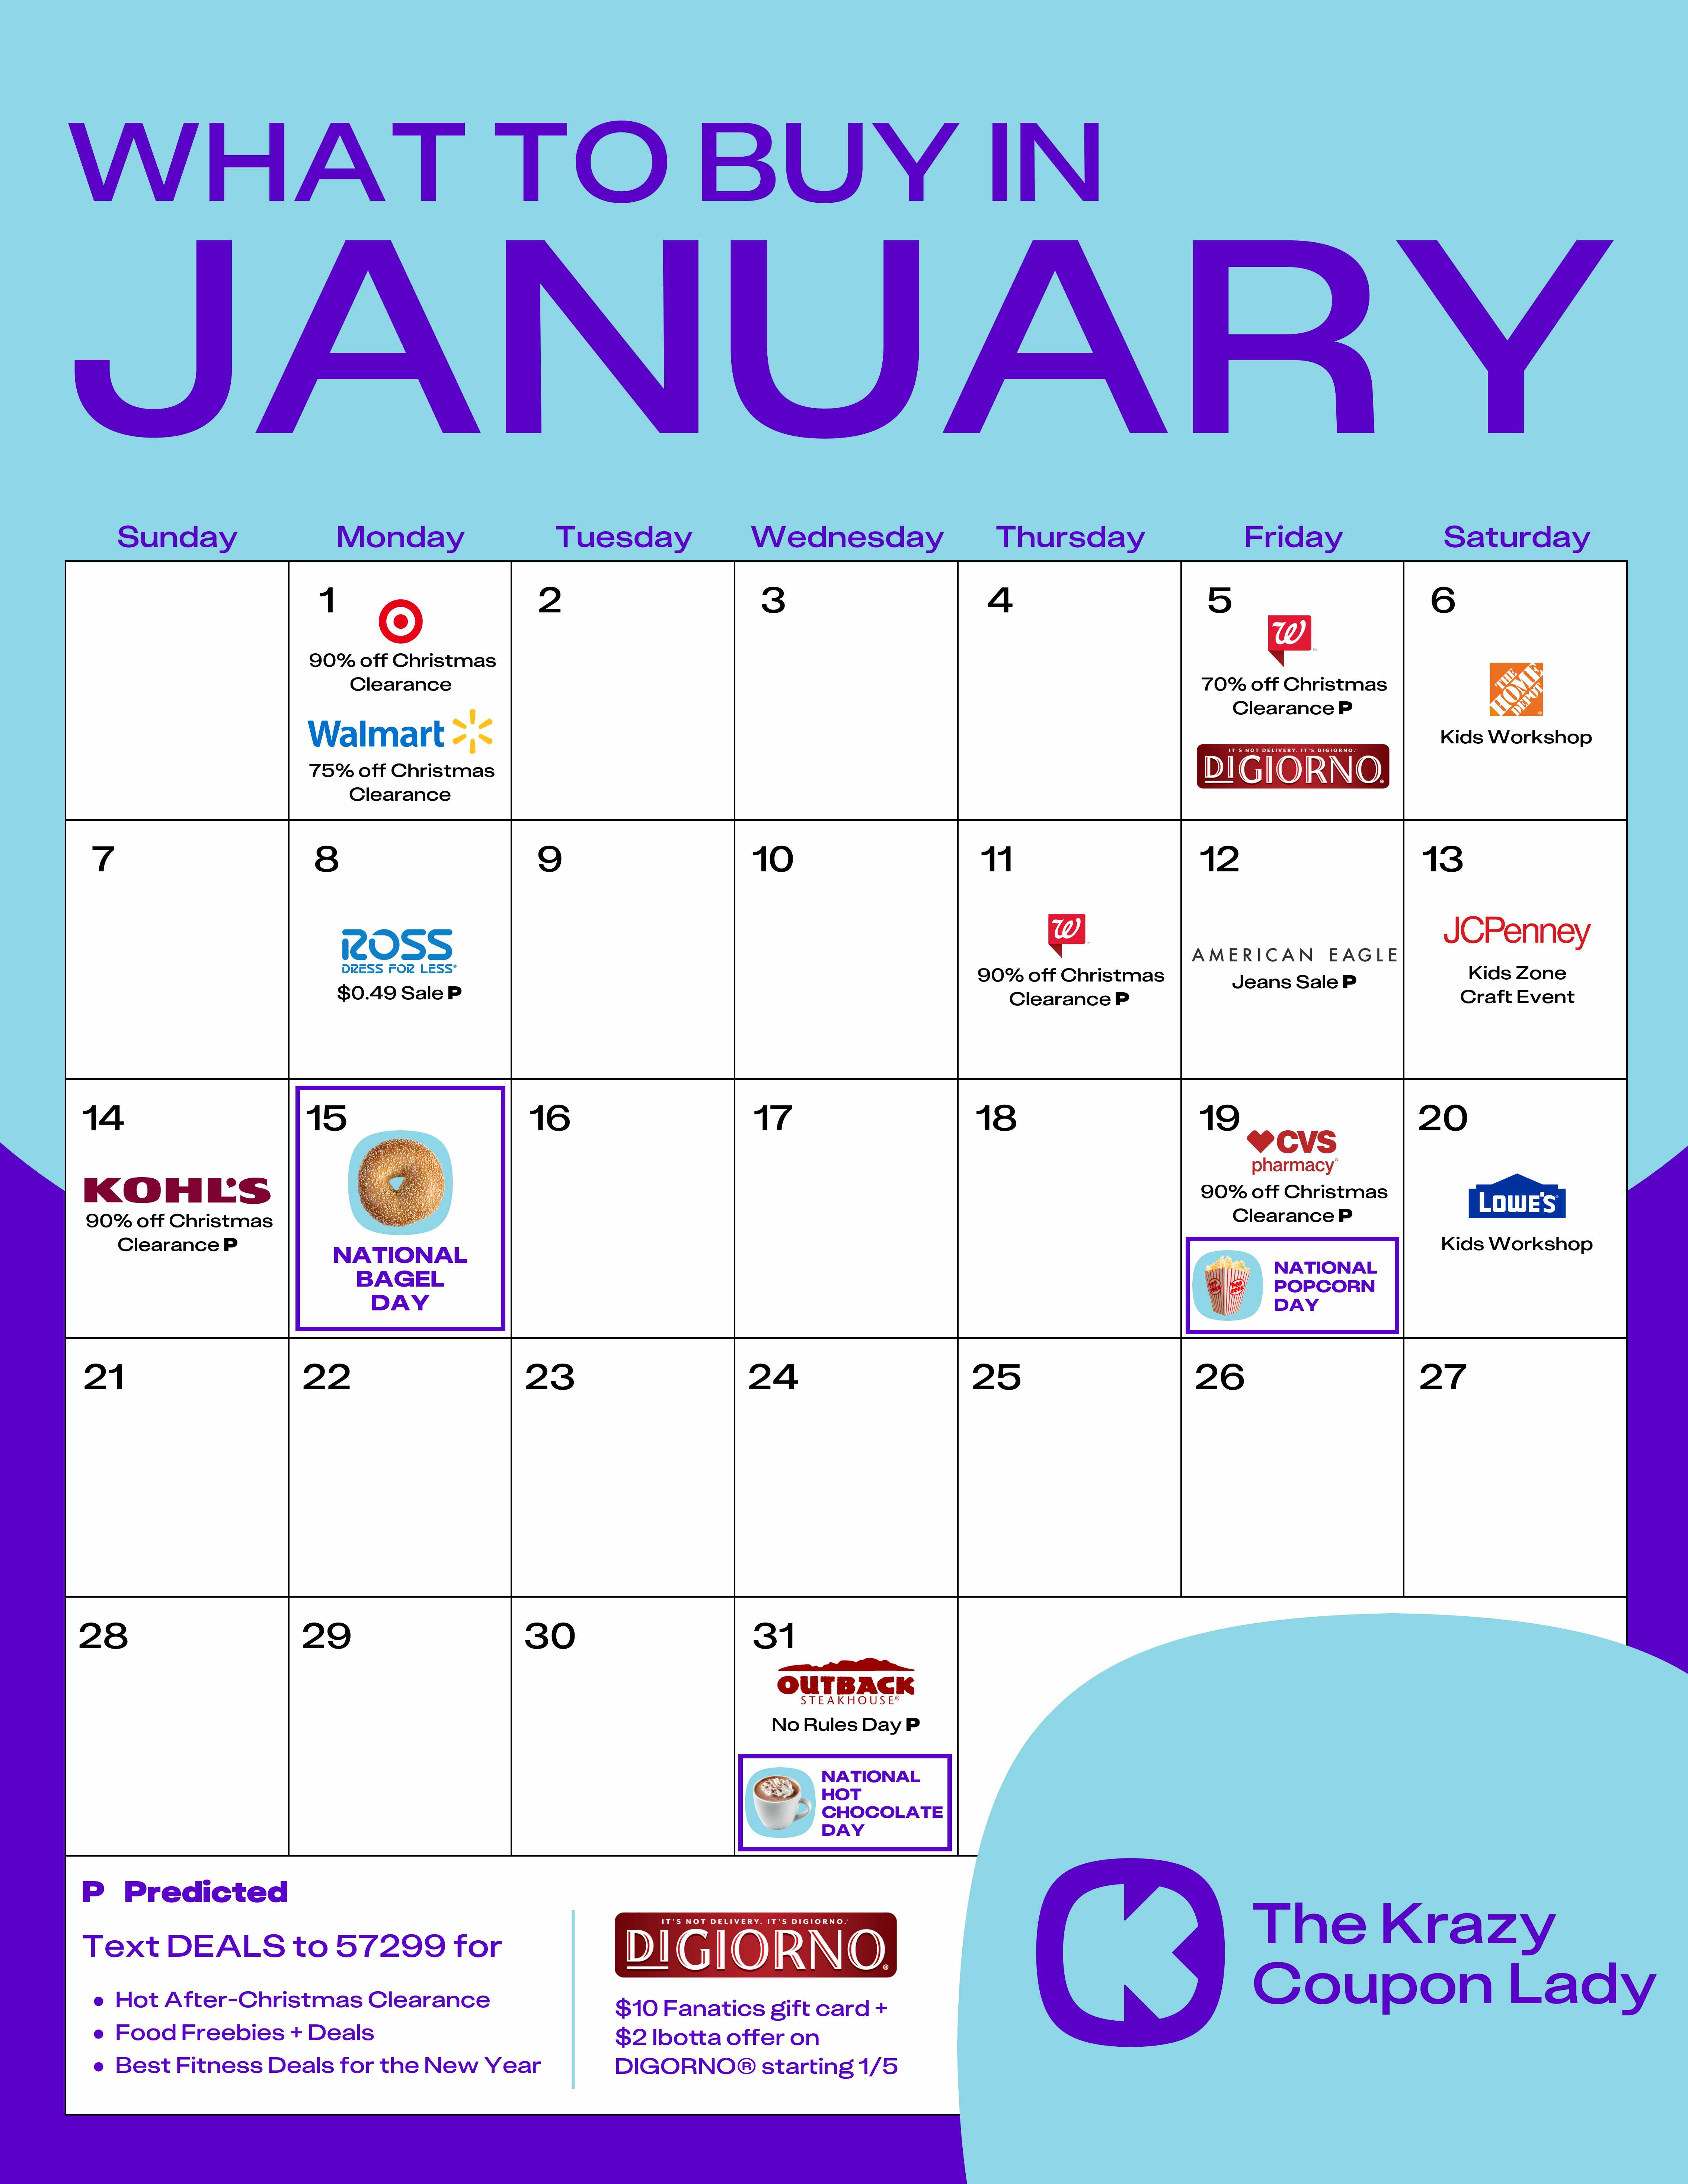 https://prod-cdn-thekrazycouponlady.imgix.net/wp-content/uploads/2018/01/what-to-buy-in-jan-editorial-1704130670-1704130671.png?auto=format&fit=fill&q=25